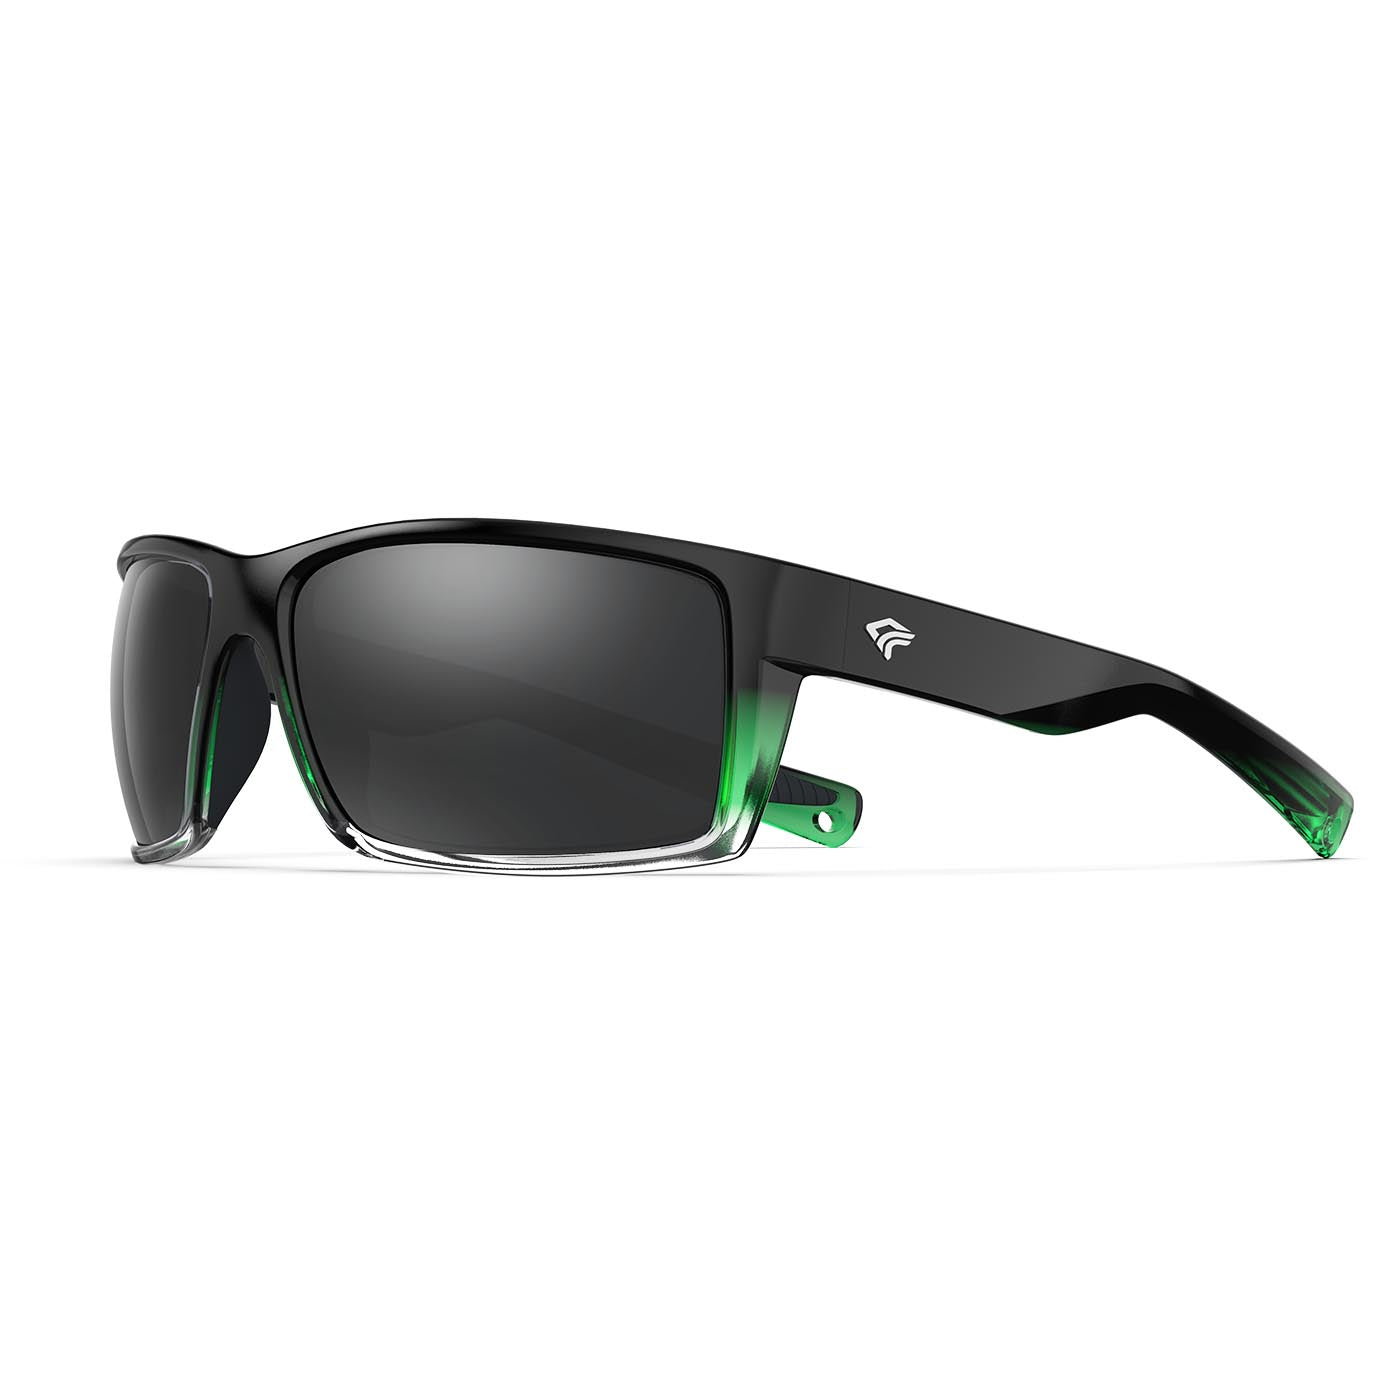 TOREGE 'Blackstone Moss' Polarized Sports Sunglasses for Men and Women with Lifetime Warranty - Perfect for Fishing, Boating, Beach, Golf & Driving